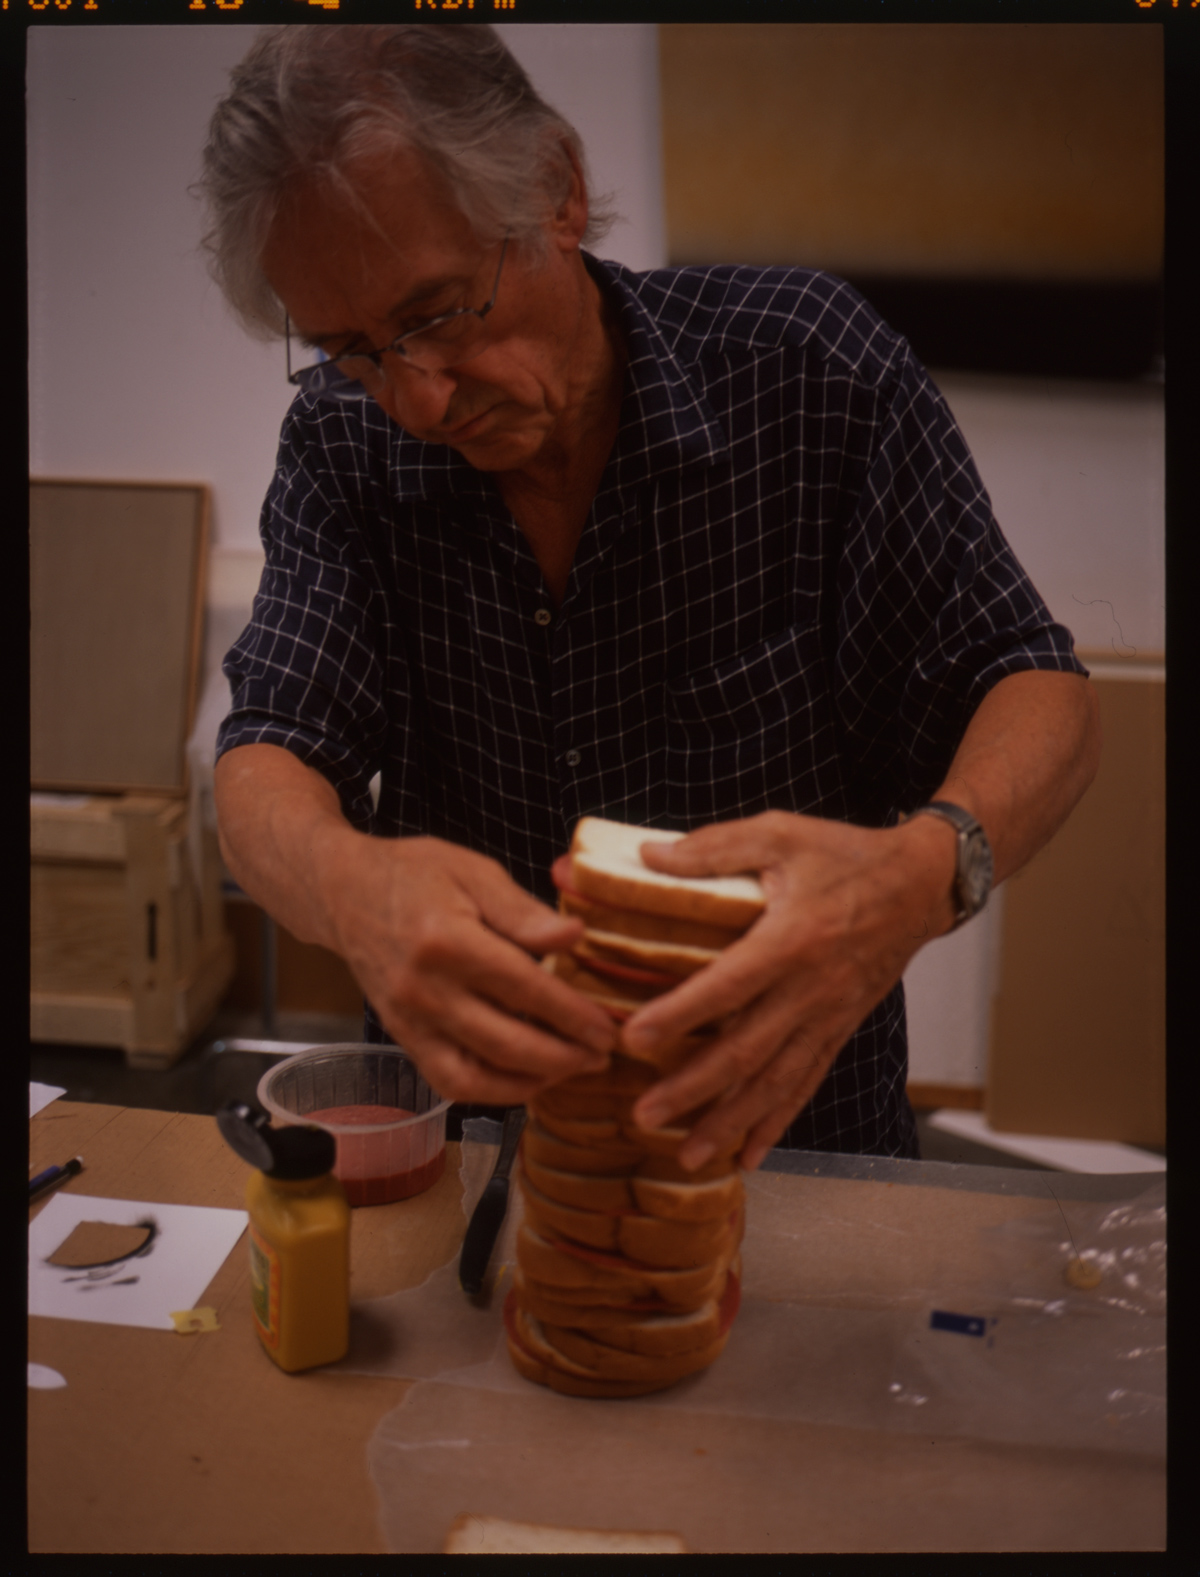 Ed Ruscha (American, b. 1937), Ed Ruscha making a sandwich to be photographed for his book On the Road: An Artist Book of the Classic Novel by Jack Kerouac, ca. 2008 or 2009. Color transparency, 4 x 5.6 cm. © Ed Ruscha. For Ruscha’s most recent book project, published in 2009, he created an illustrated version of Jack Kerouac’s seminal beat novel On the Road. The complete text of the novel is reproduced alongside photographs Ruscha made or selected from other sources. Several boxes of material document the process from conception to publication, and include contact sheets, negatives, and transparencies for all the images from the book that Ruscha made himself (including this sandwich), as well as a few that didn’t make the cut.